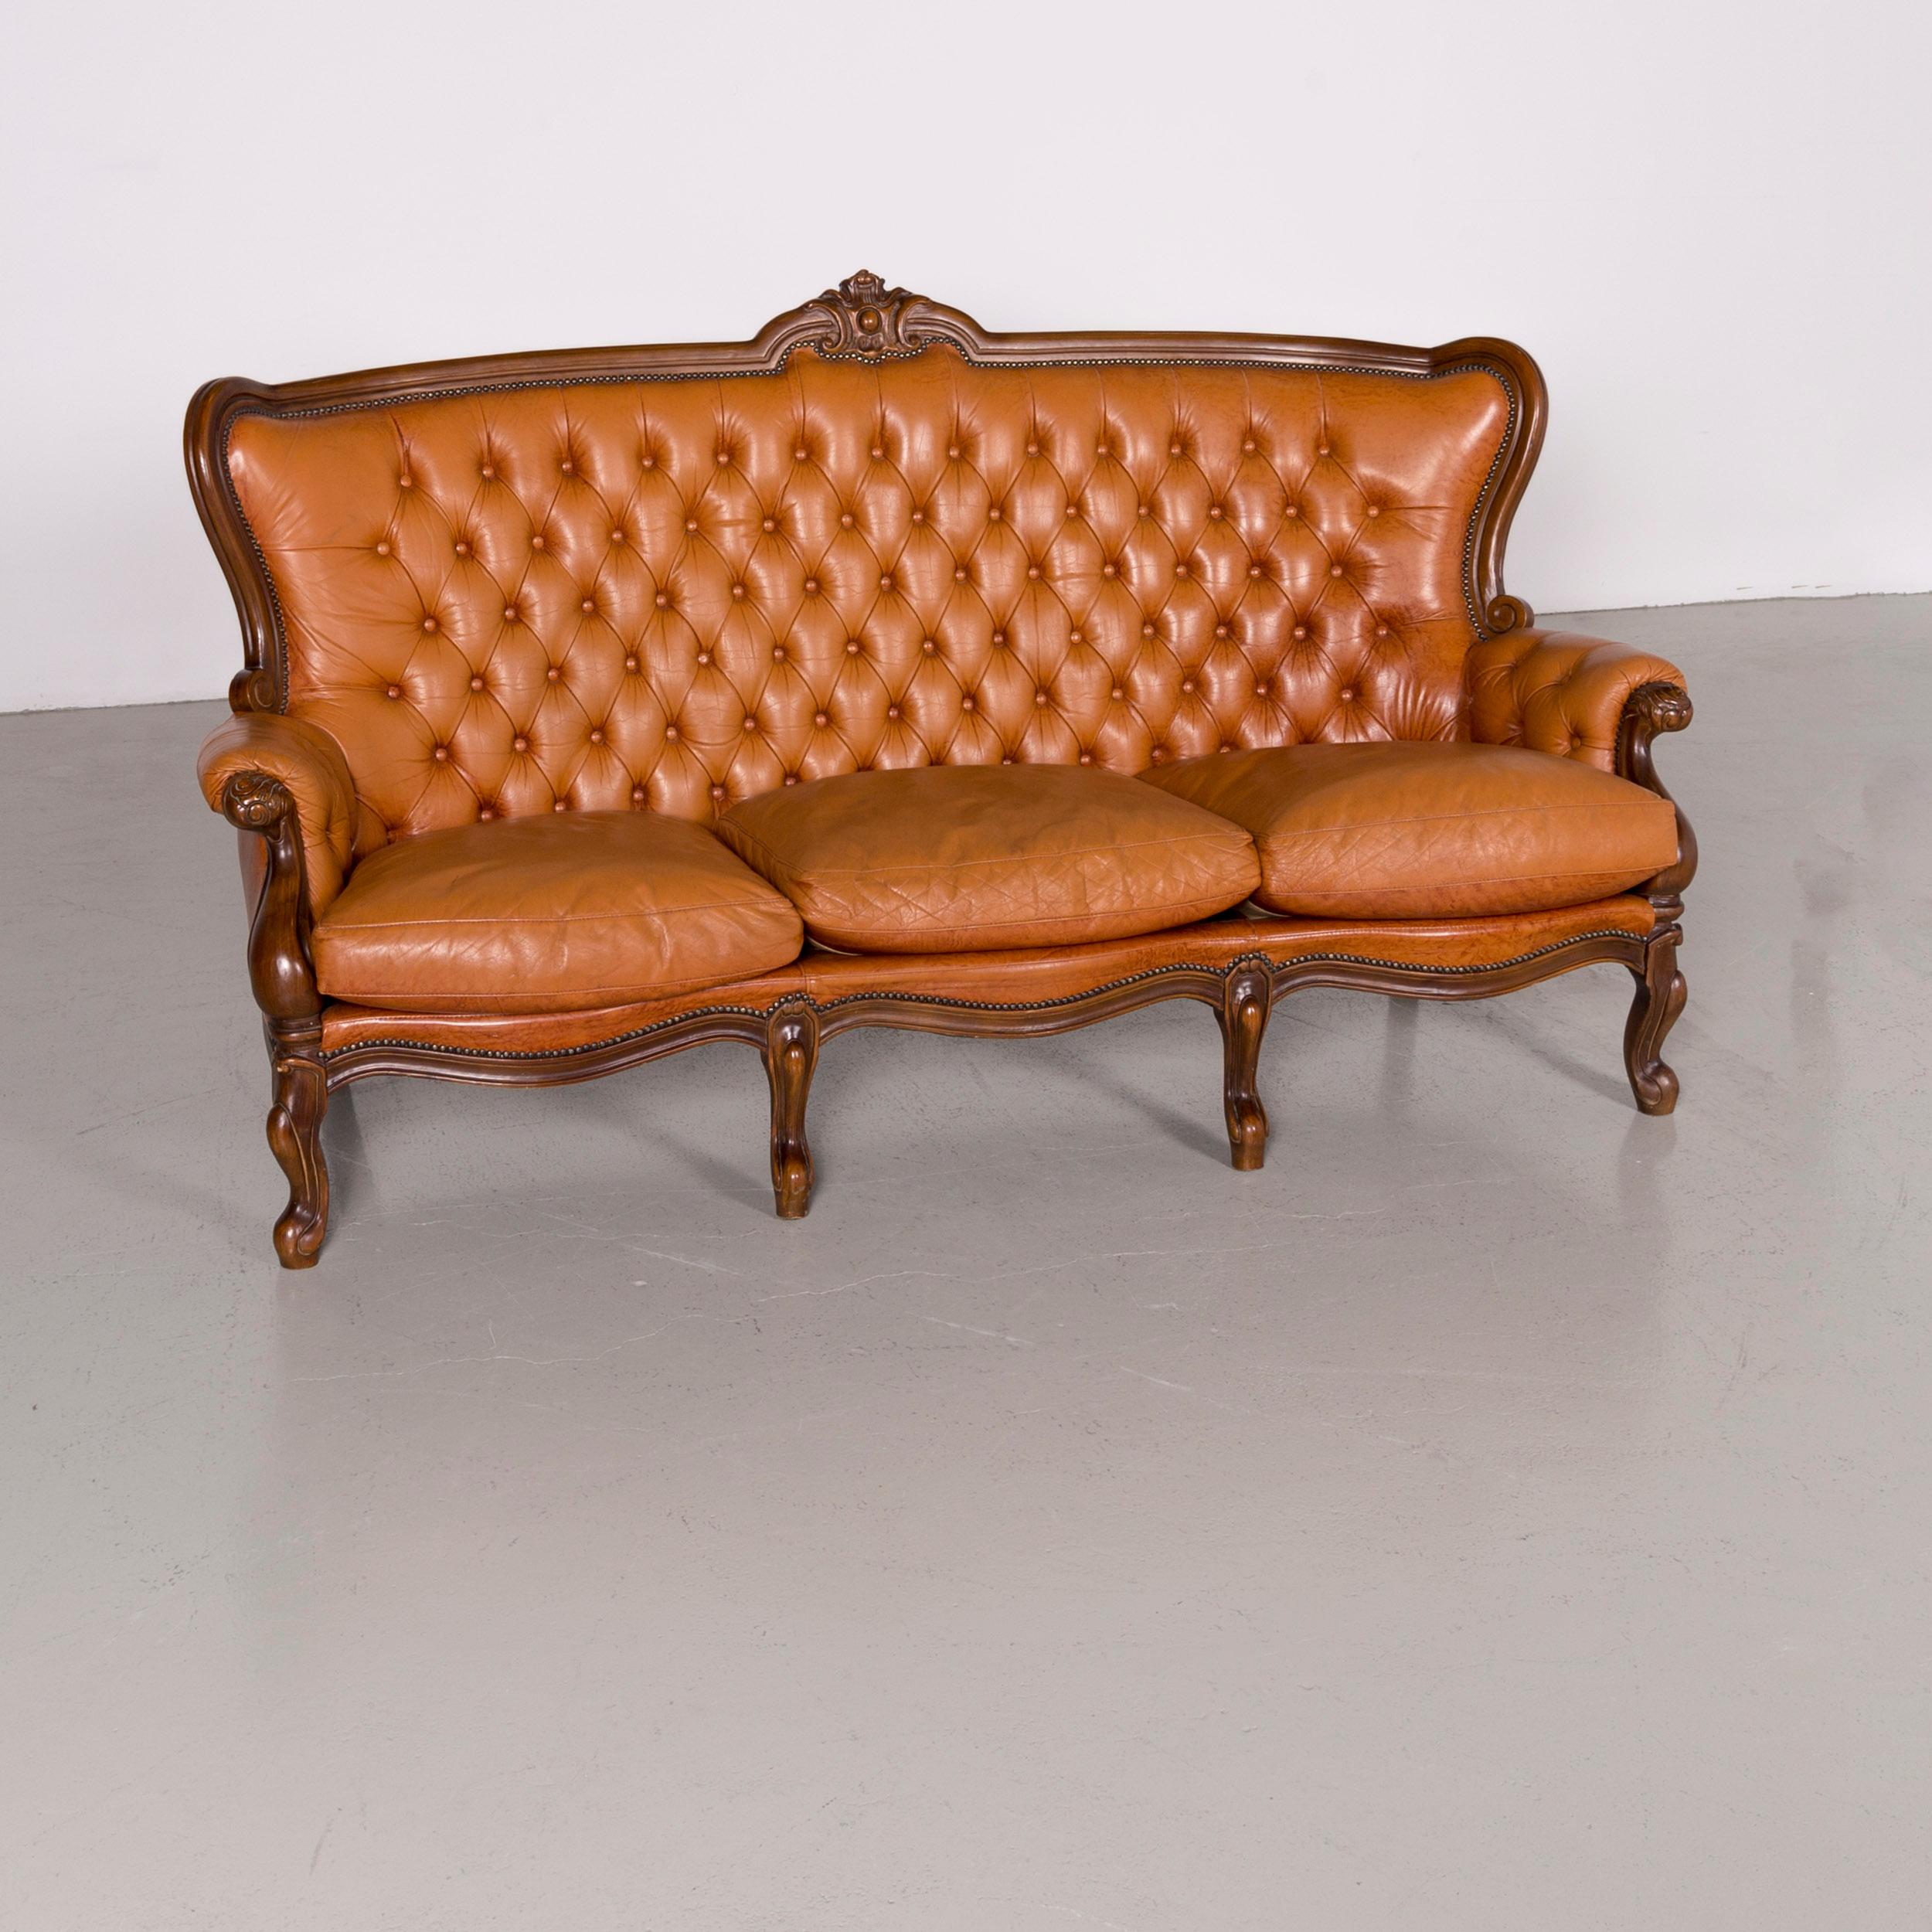 Chesterfield leather sofa brown vintage retro couch.